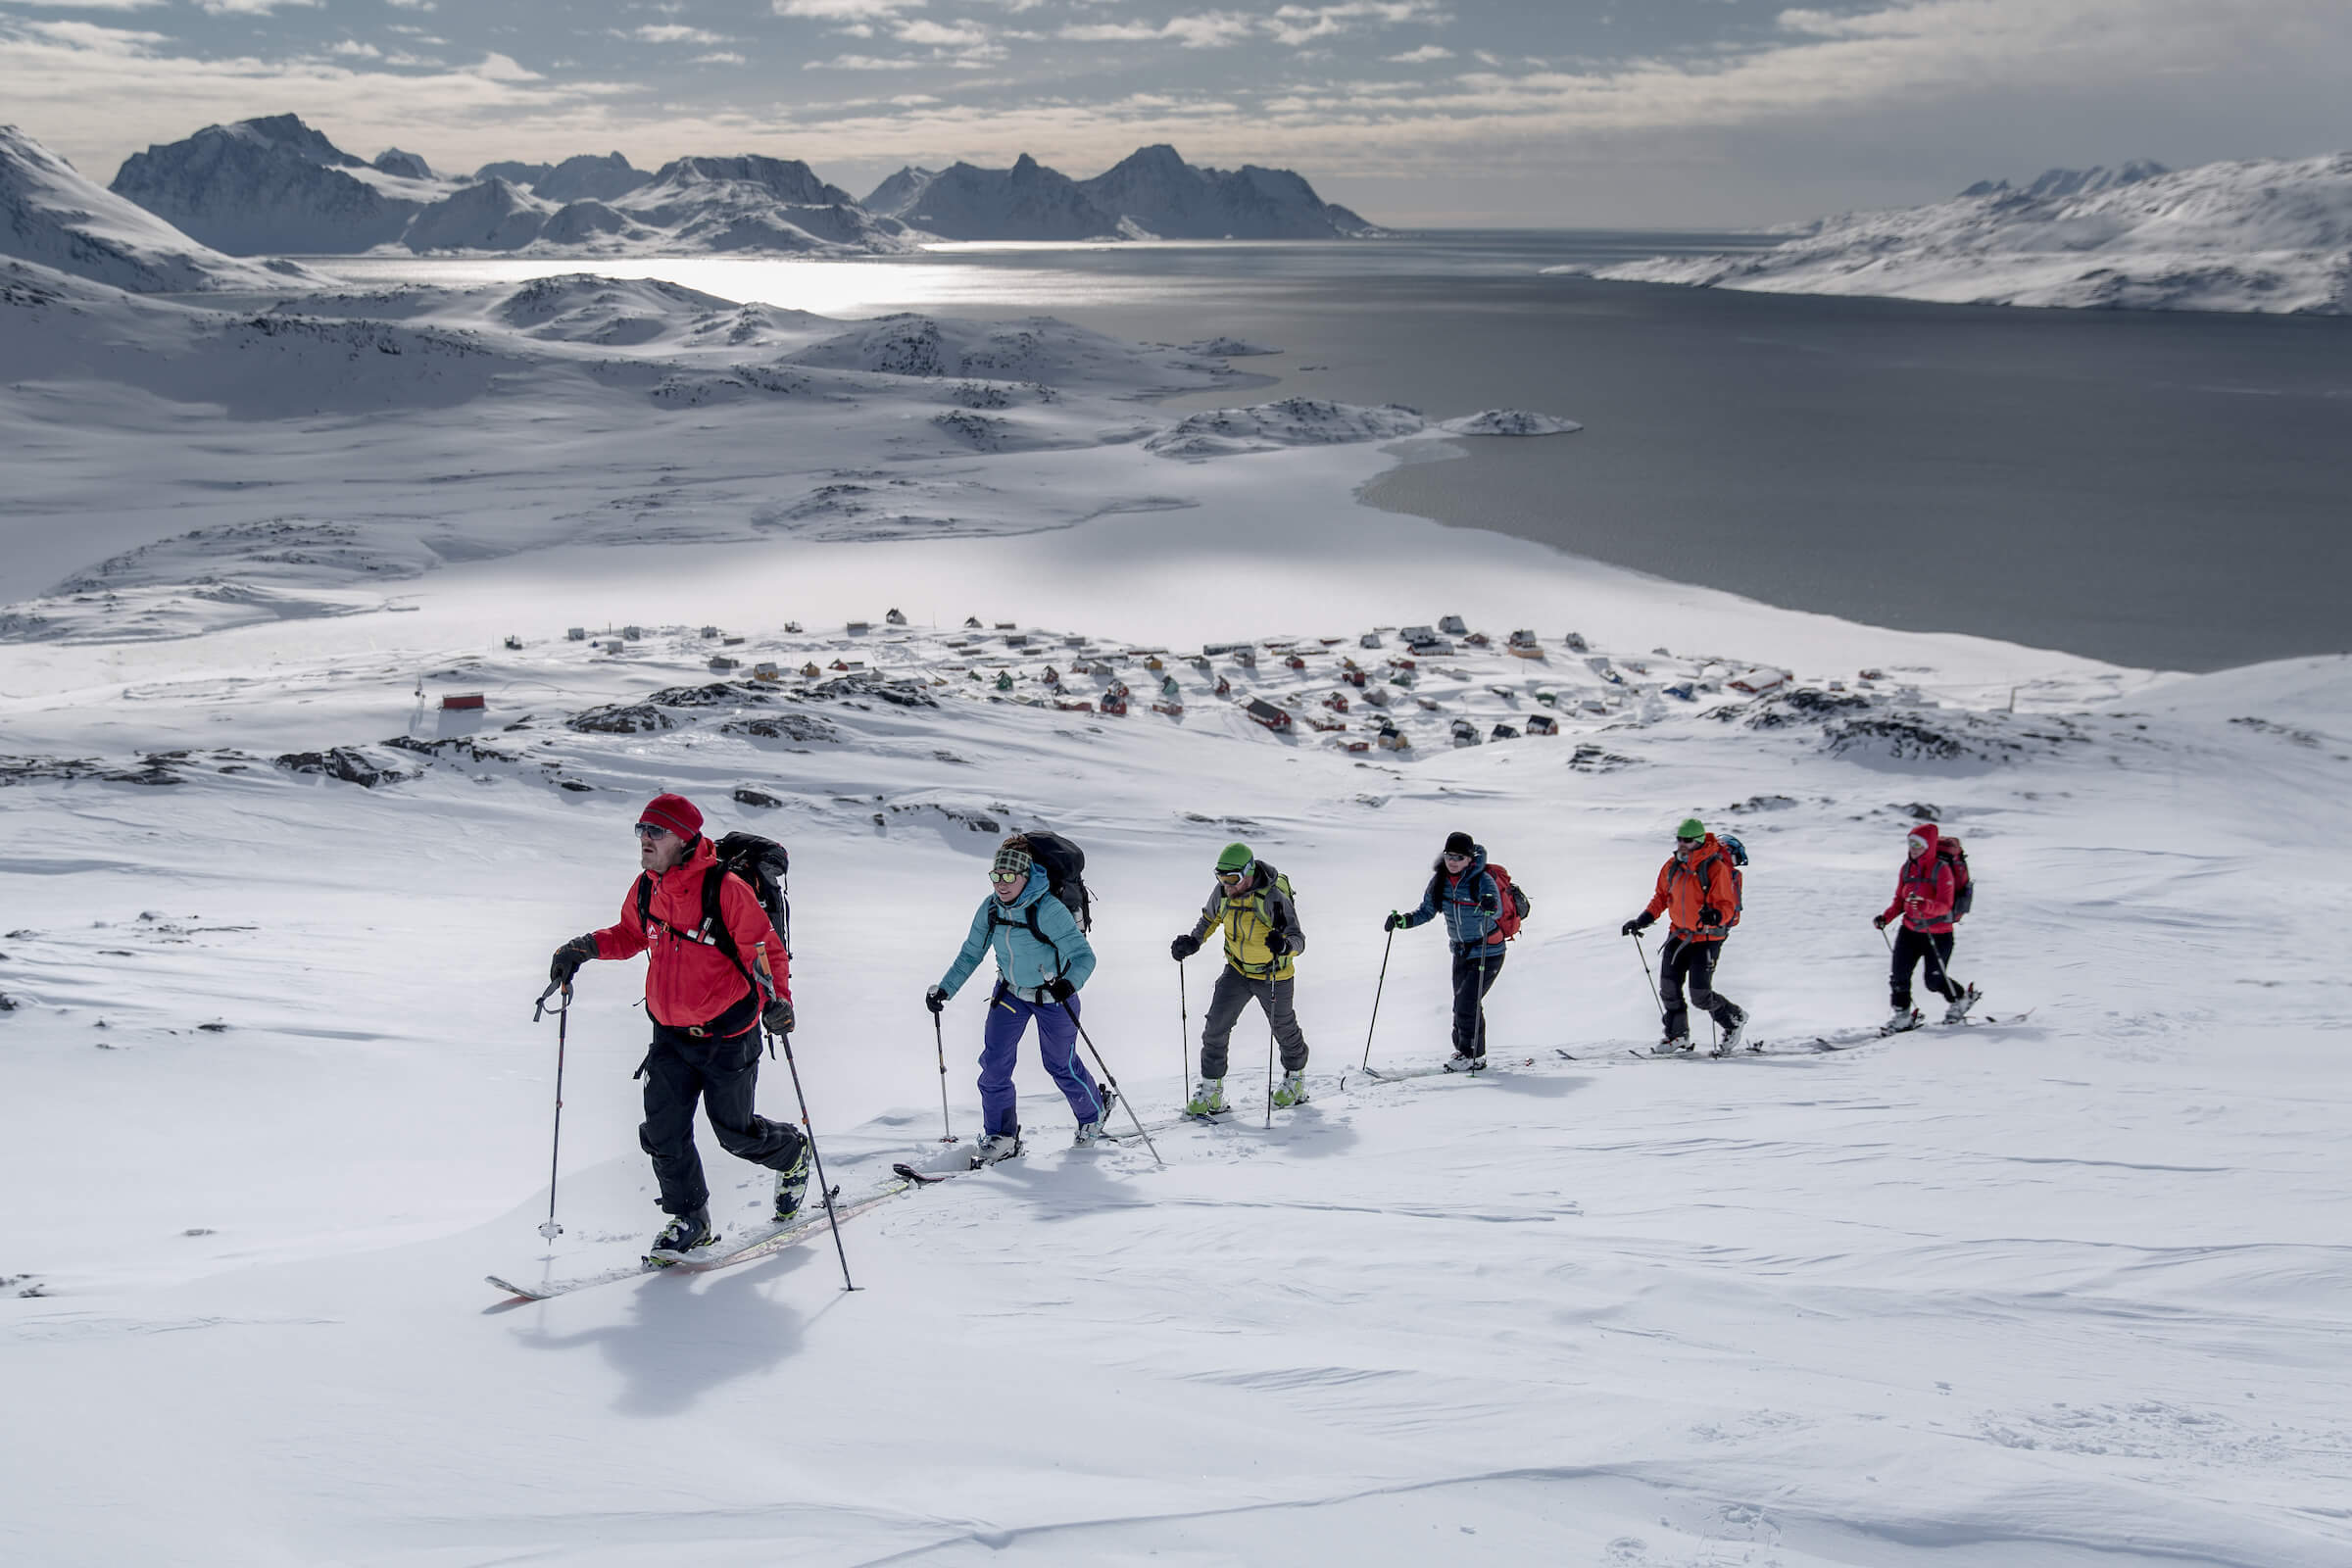 A group of skiers climbing a mountain near Kulusuk on a ski touring trip in East Greenland. Photo by Mads Pihl - Visit Greenland